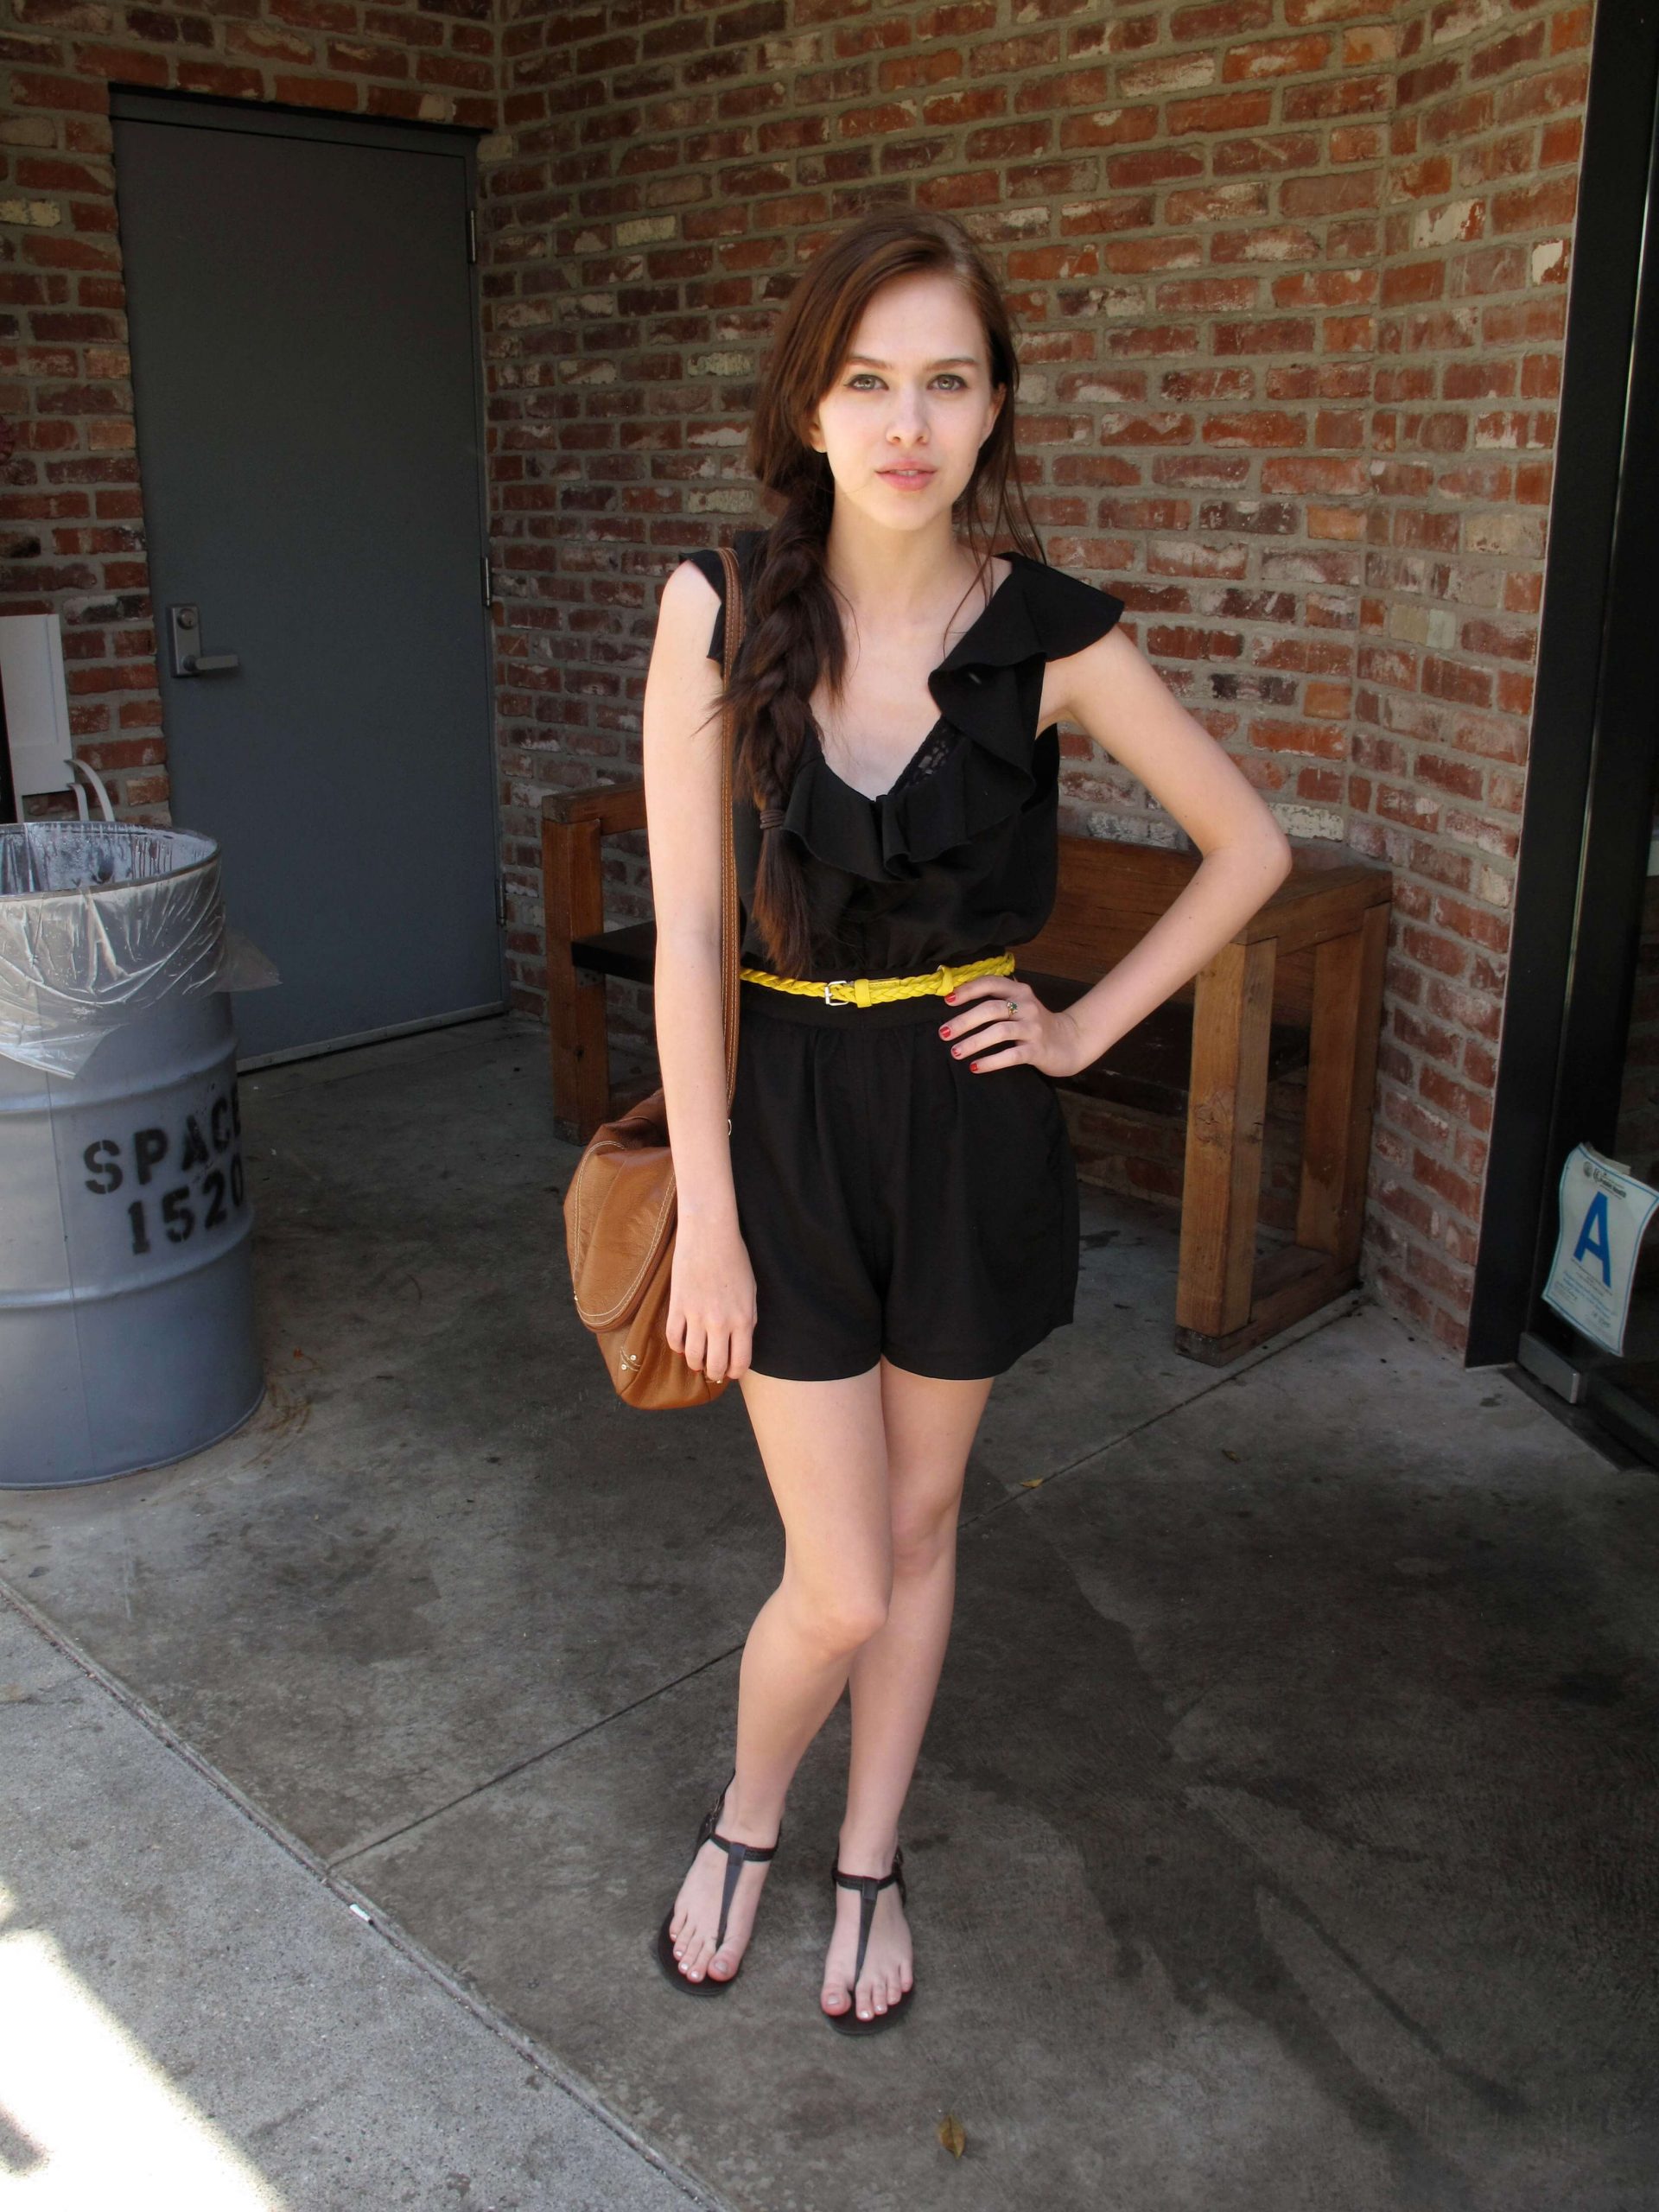 Sassy Babe In Mini Black Dress Accessorized With Yellow Belt On Waist